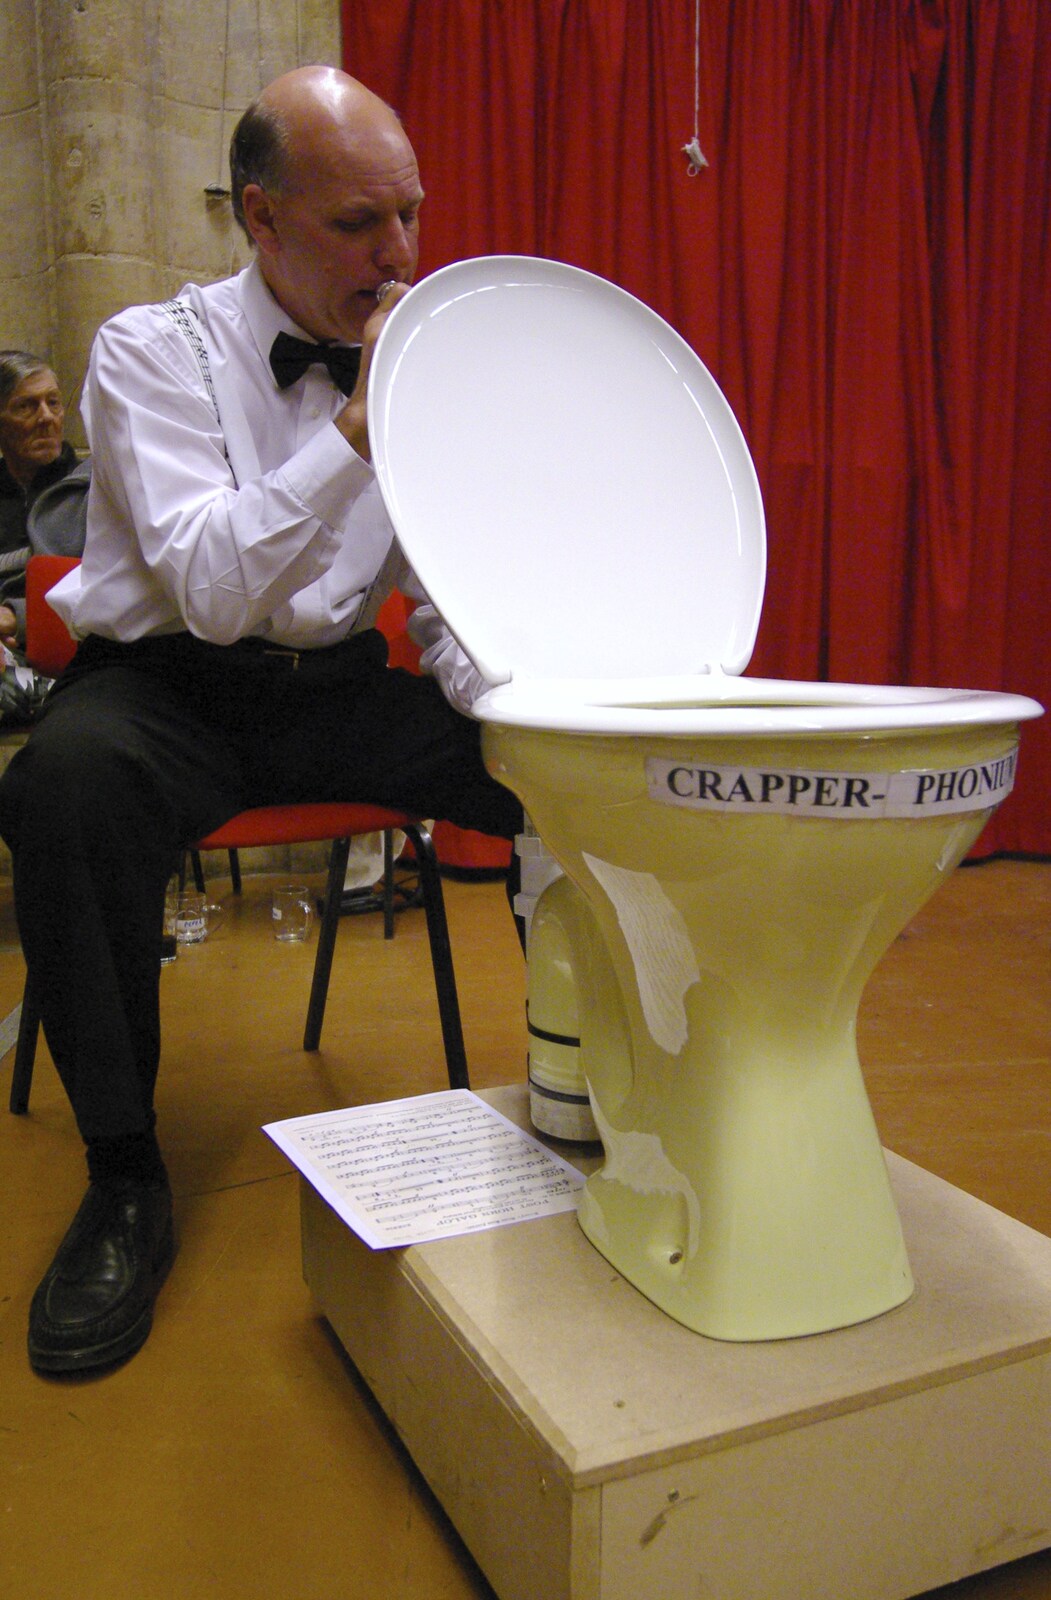 The Crapper-phonium Mark 1 from The Brome Swan at the 30th Norwich Beer Festival, Norfolk - 24th October 2007